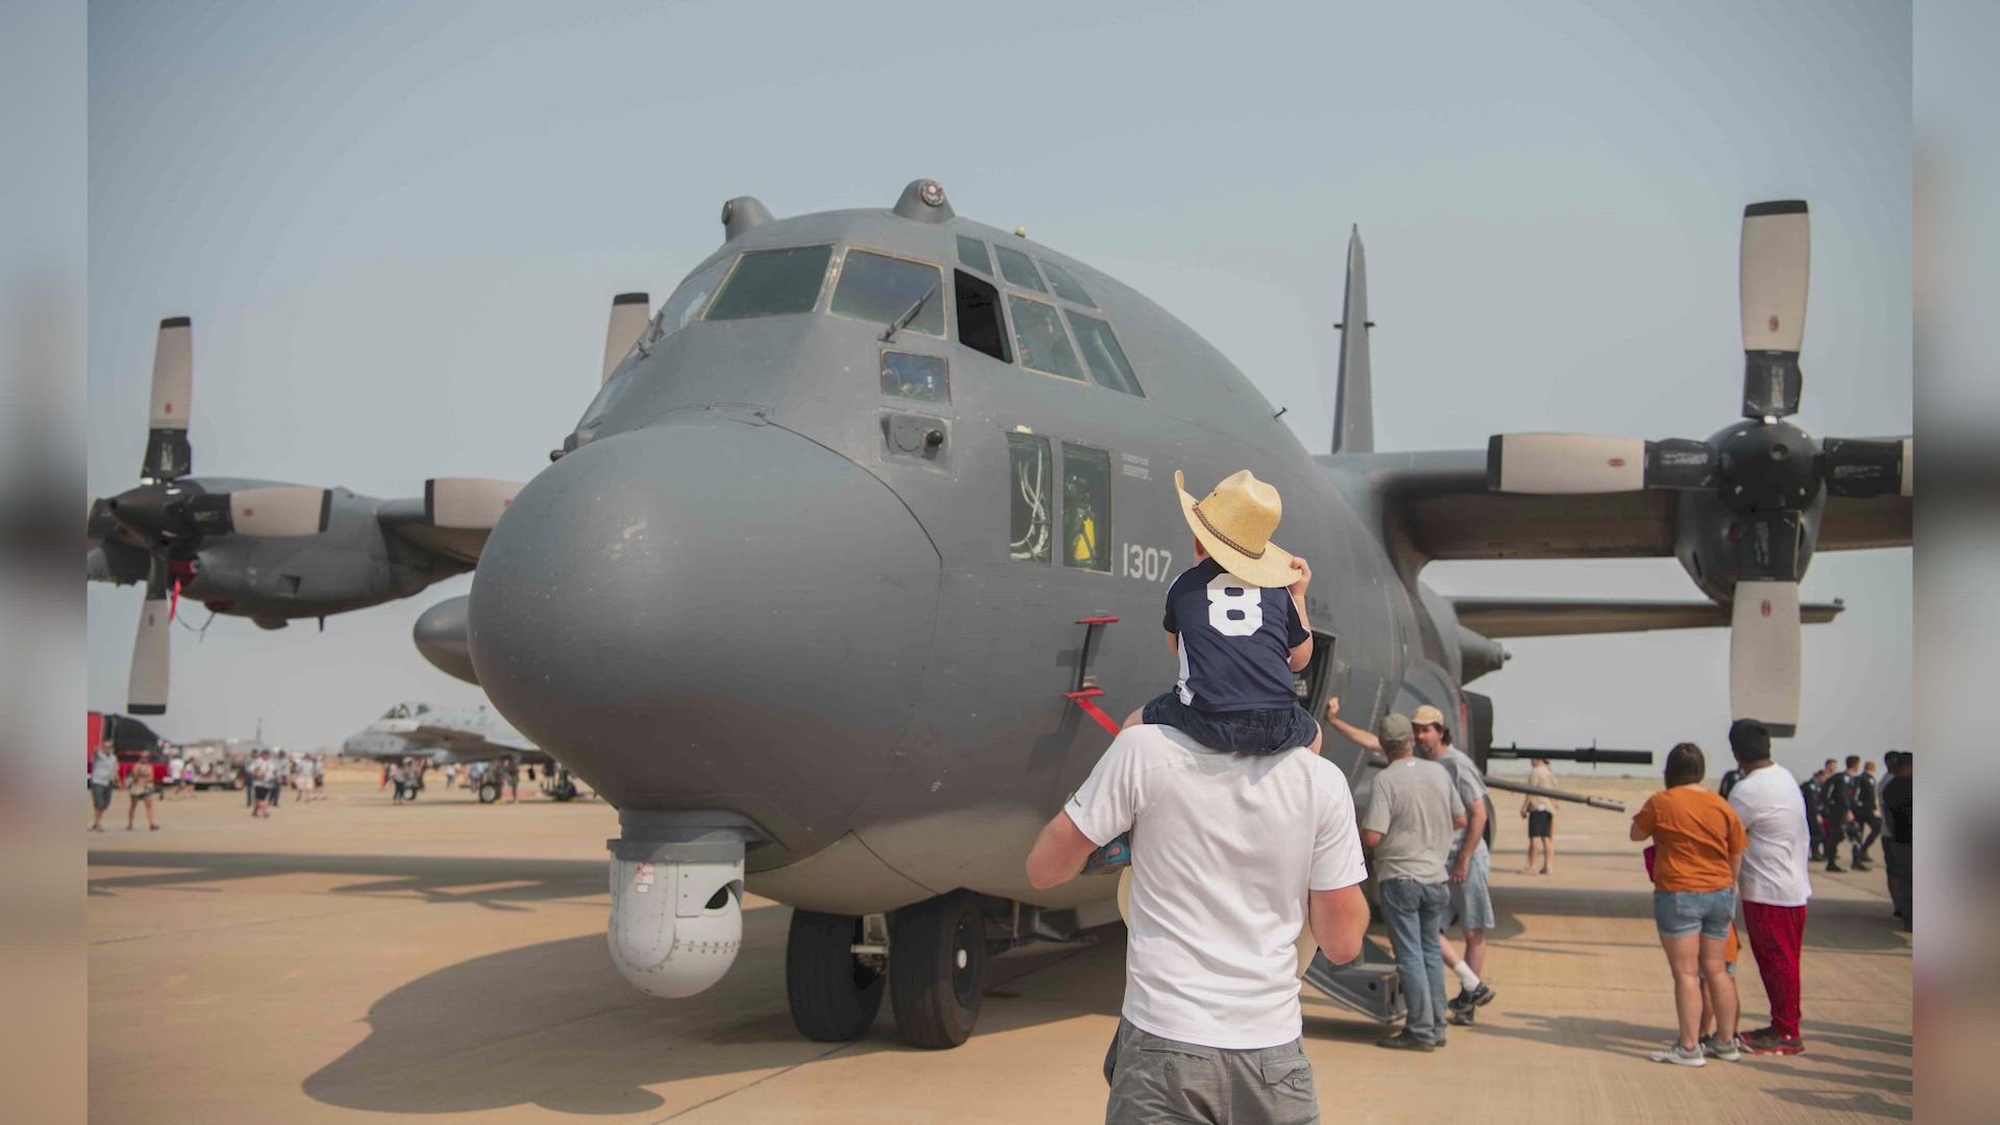 After 34 years of distinguished service to this nation, one of the last AC-130W Stinger II gunships was relieved from Active Duty on June 1, 2022.

"The Fourth Horseman", along with the remaining two AC-130Ws stationed at Cannon Air Force Base, N.M., will be effectively retired next month, by order of the Secretary of the Air Force.